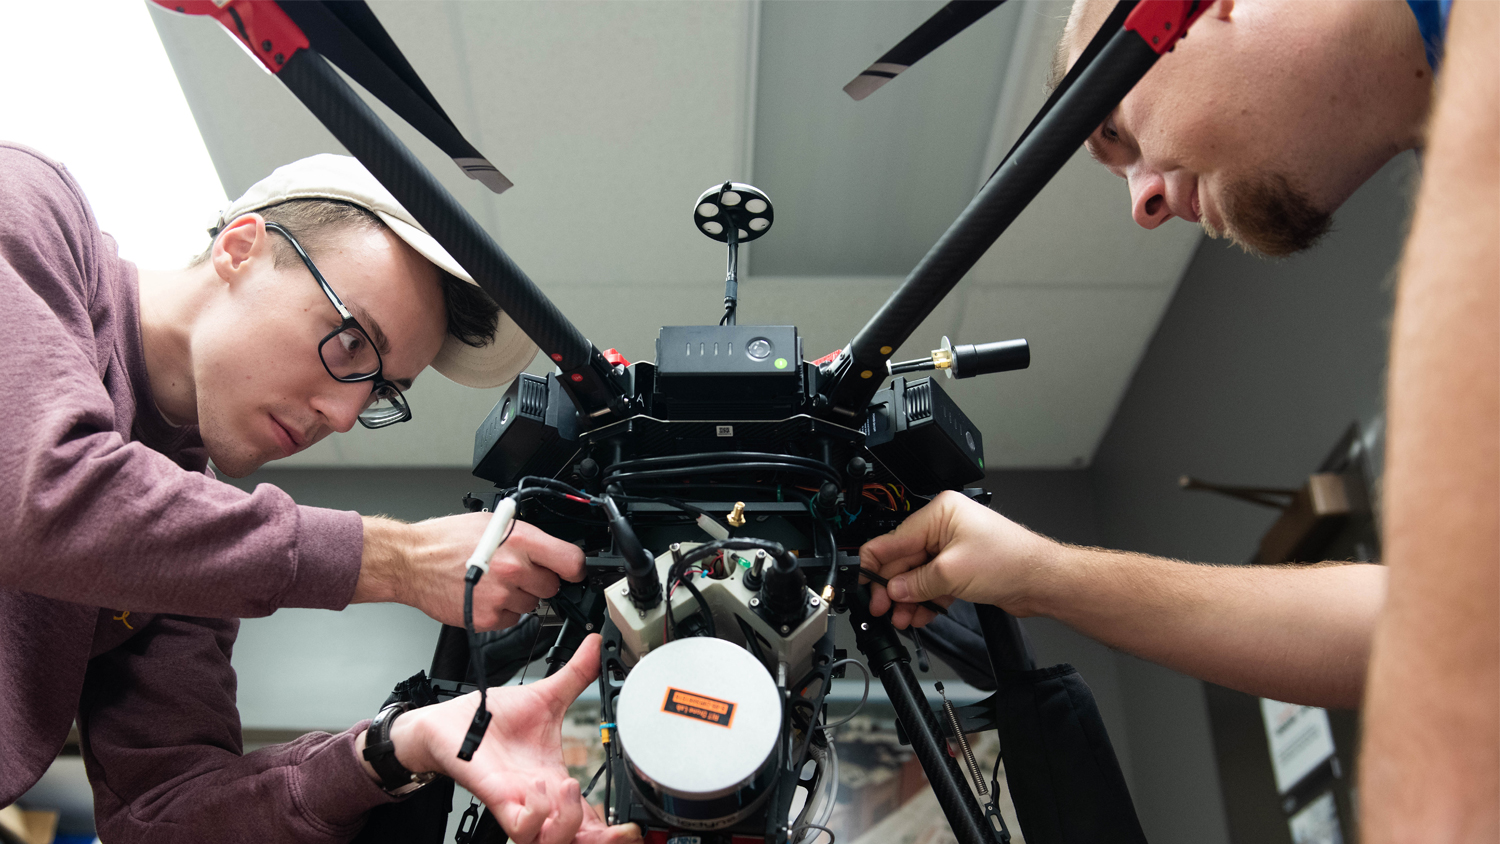 two students making adjustments to a drone